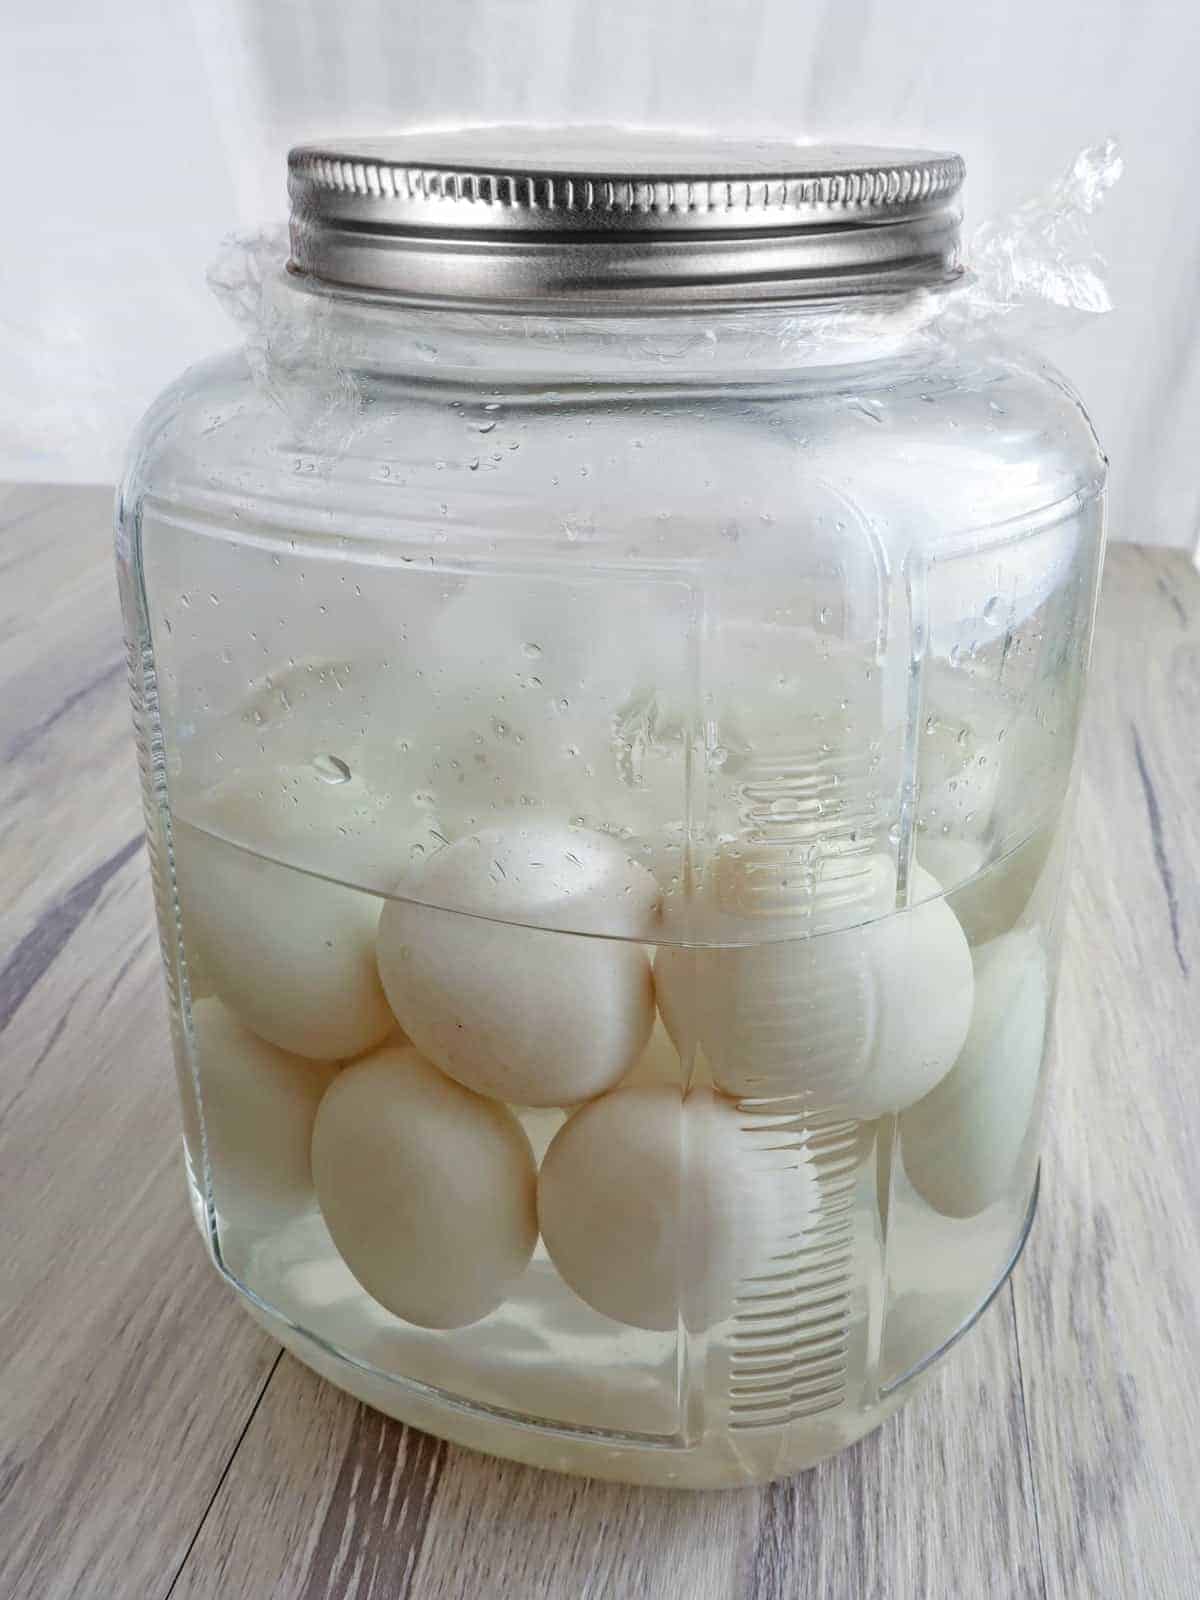 Duck eggs brining in salted water